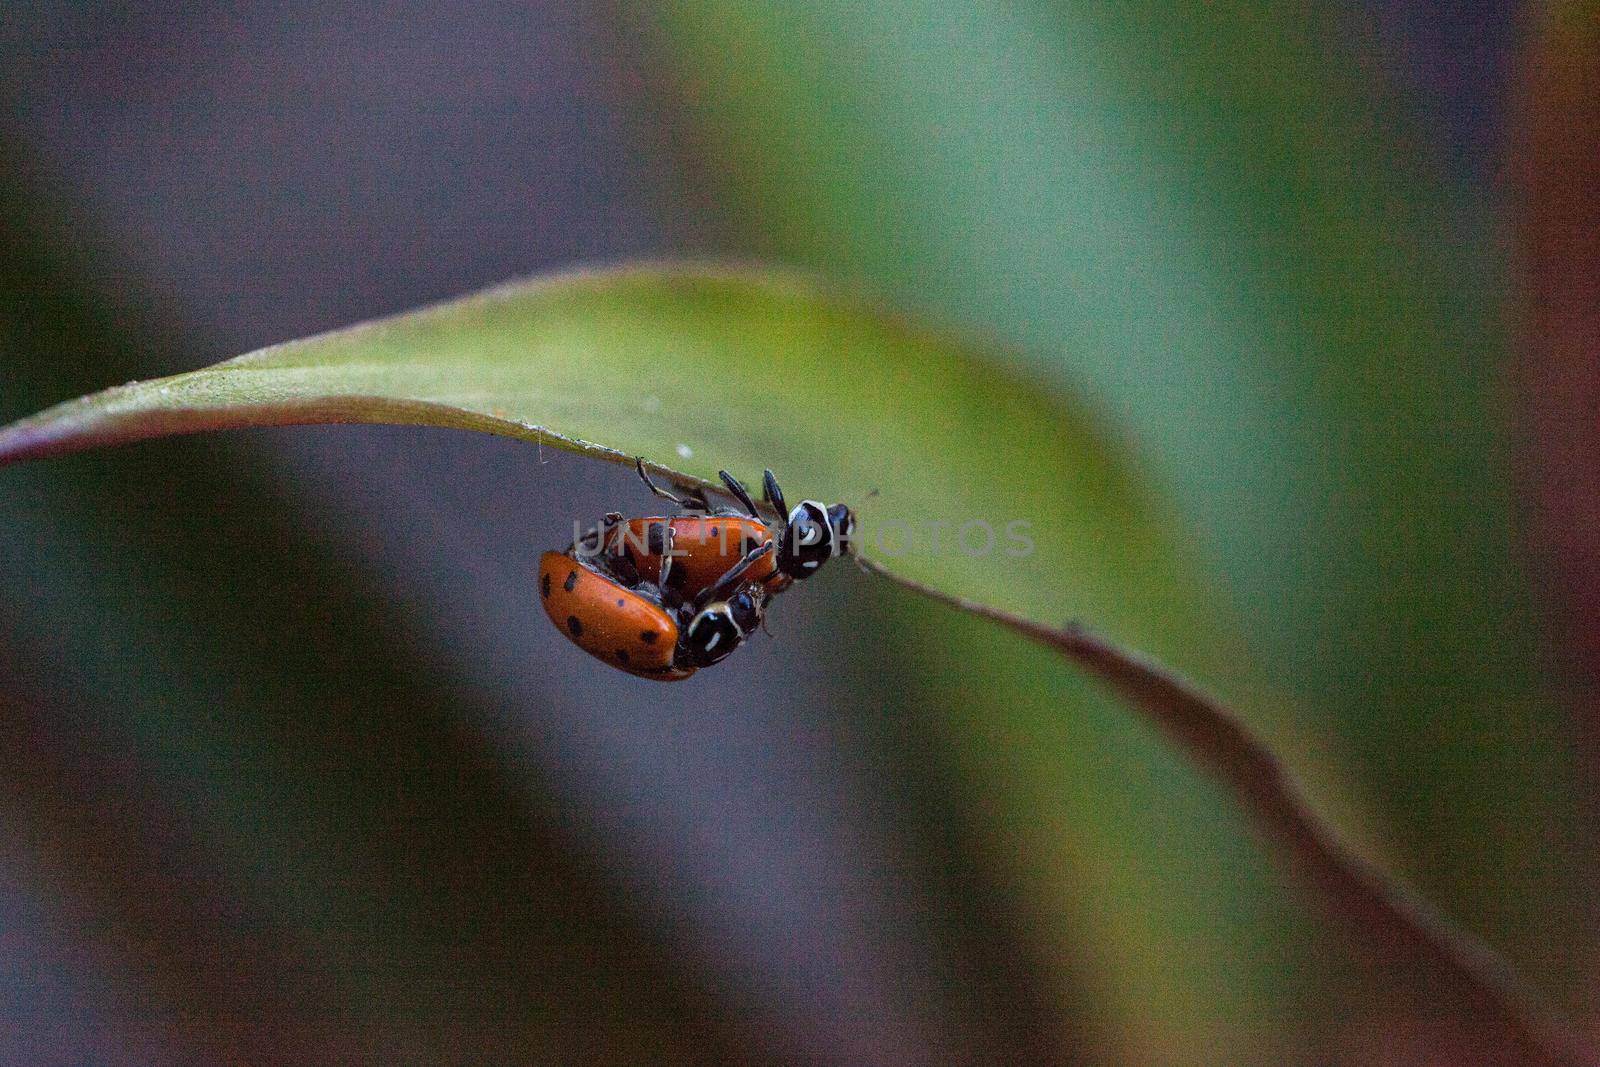 Mating Spotted Convergent lady beetles also called the ladybug Hippodamia convergens on a green leaf